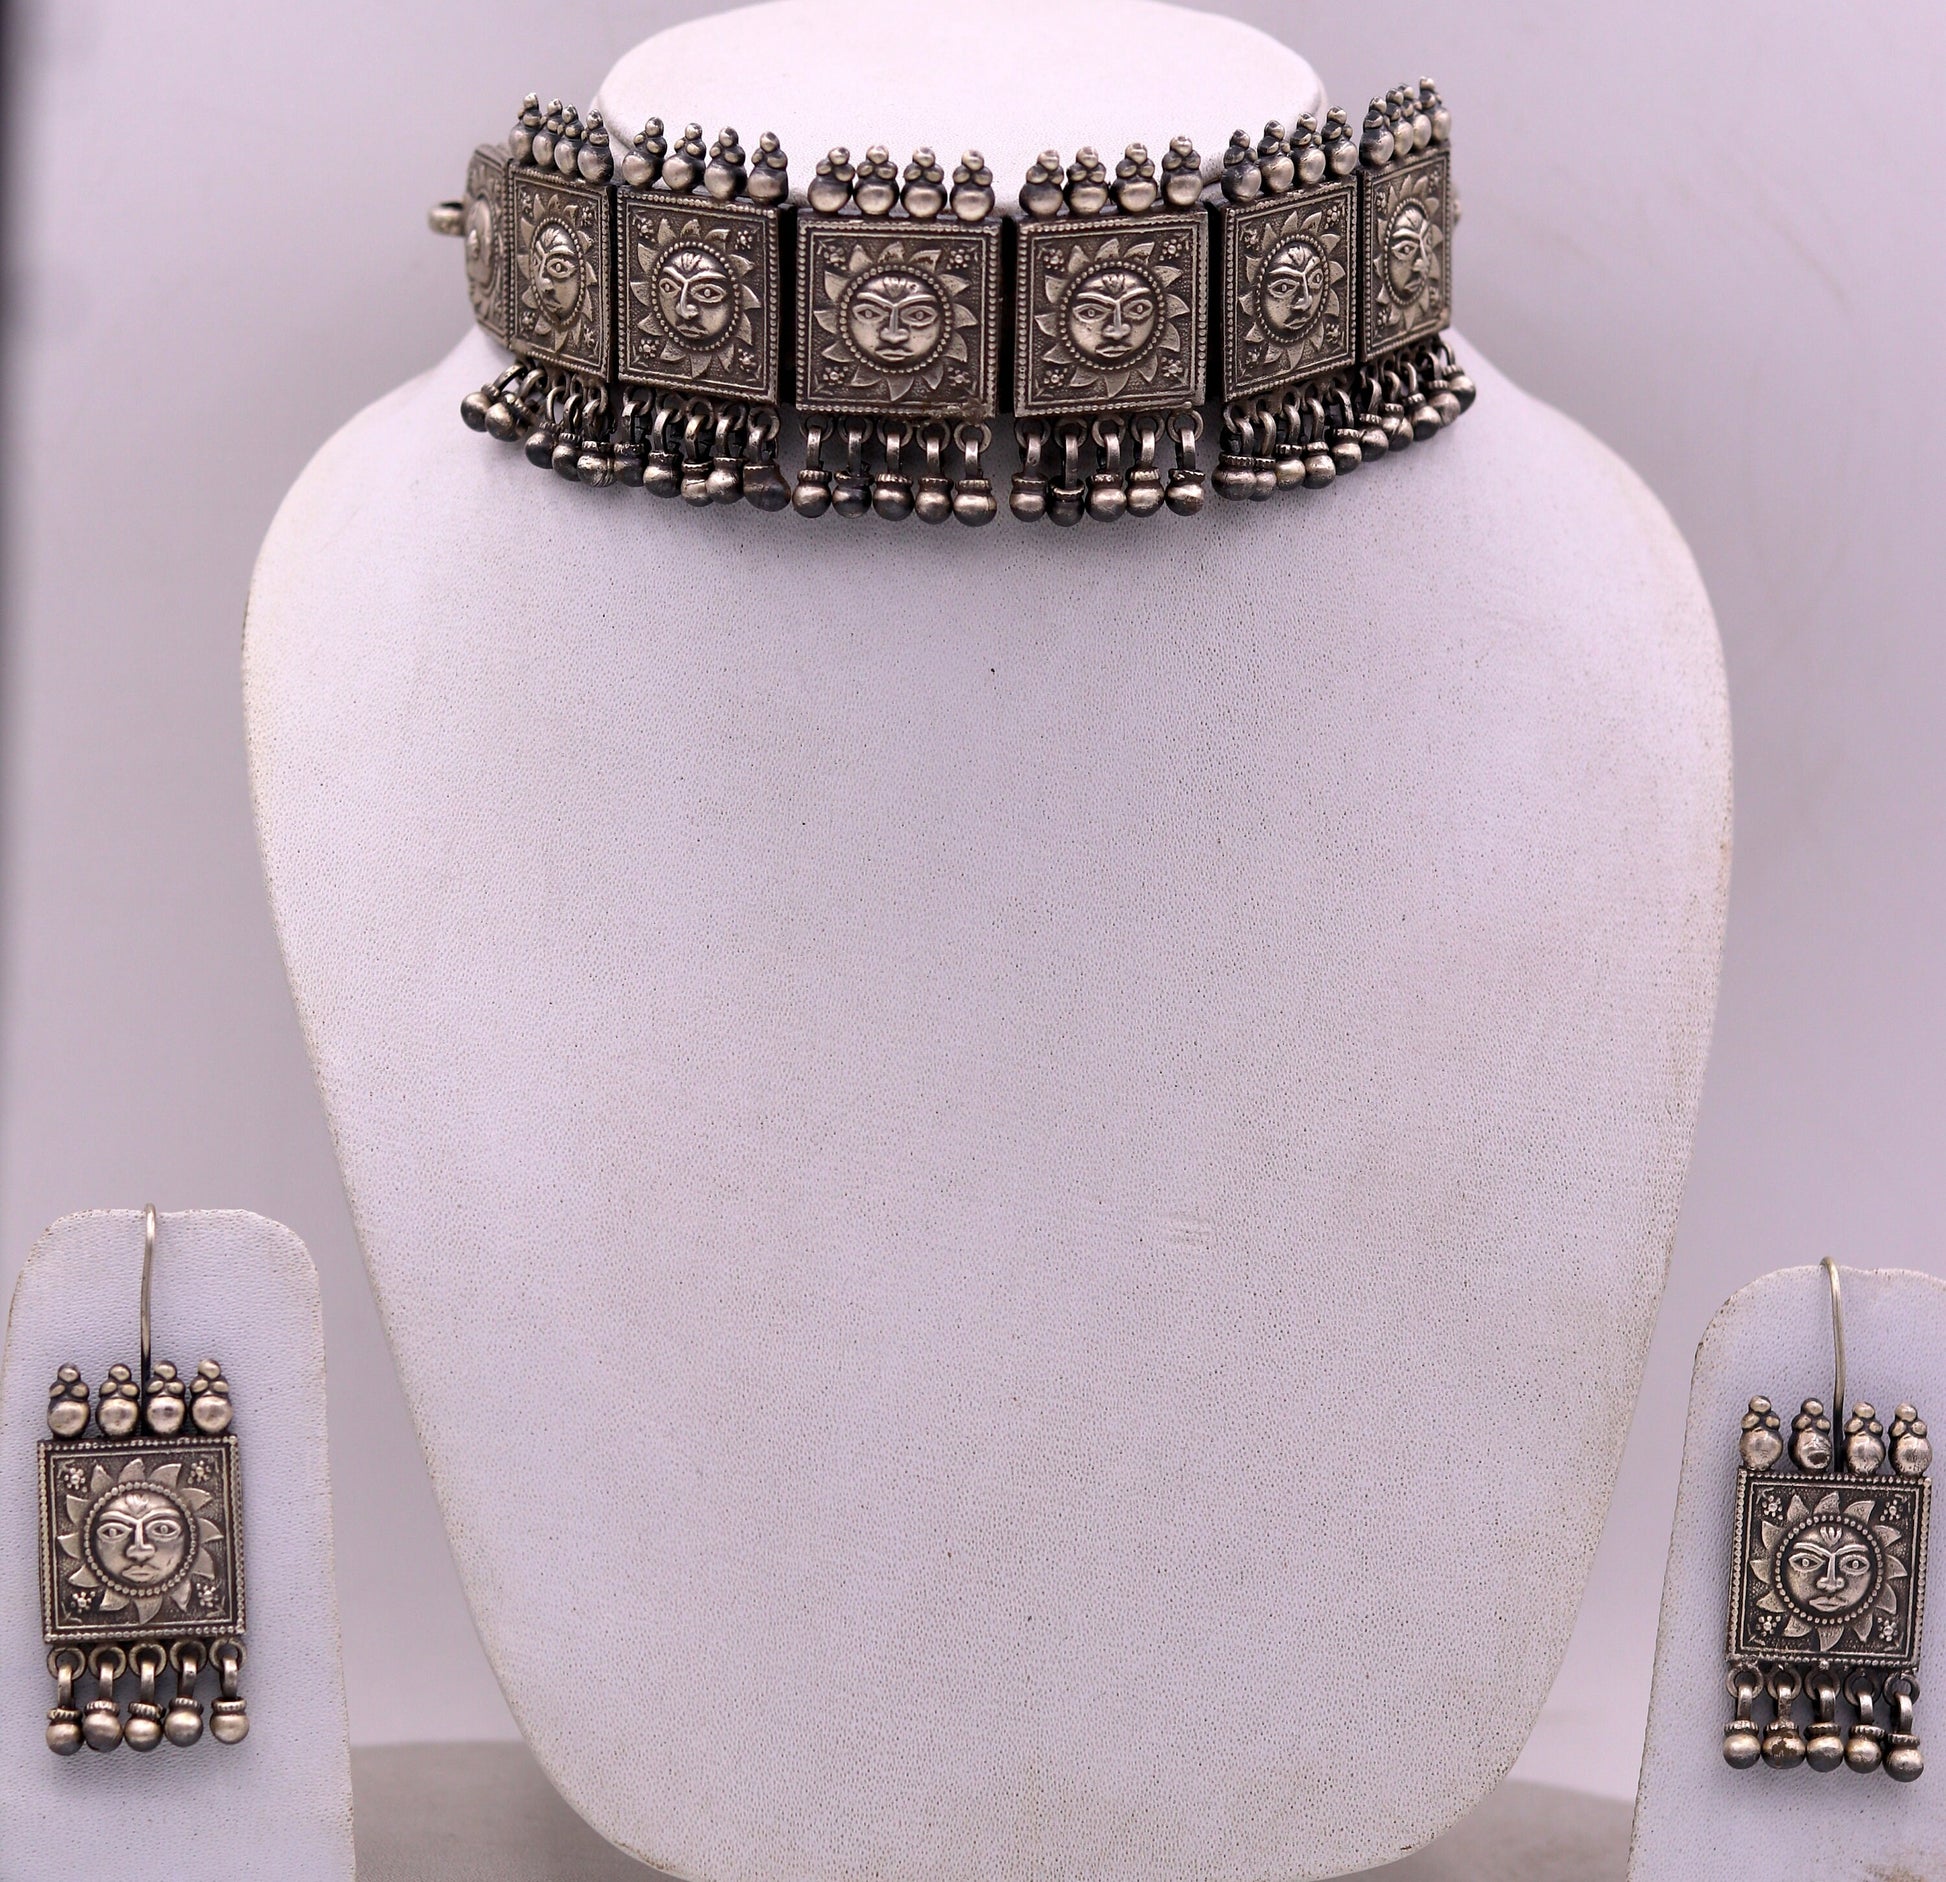 925 sterling silver Traditional cultural design trendy fit neck choker necklace tribal ethnic tribal jewelry best wedding jewelry set78 - TRIBAL ORNAMENTS